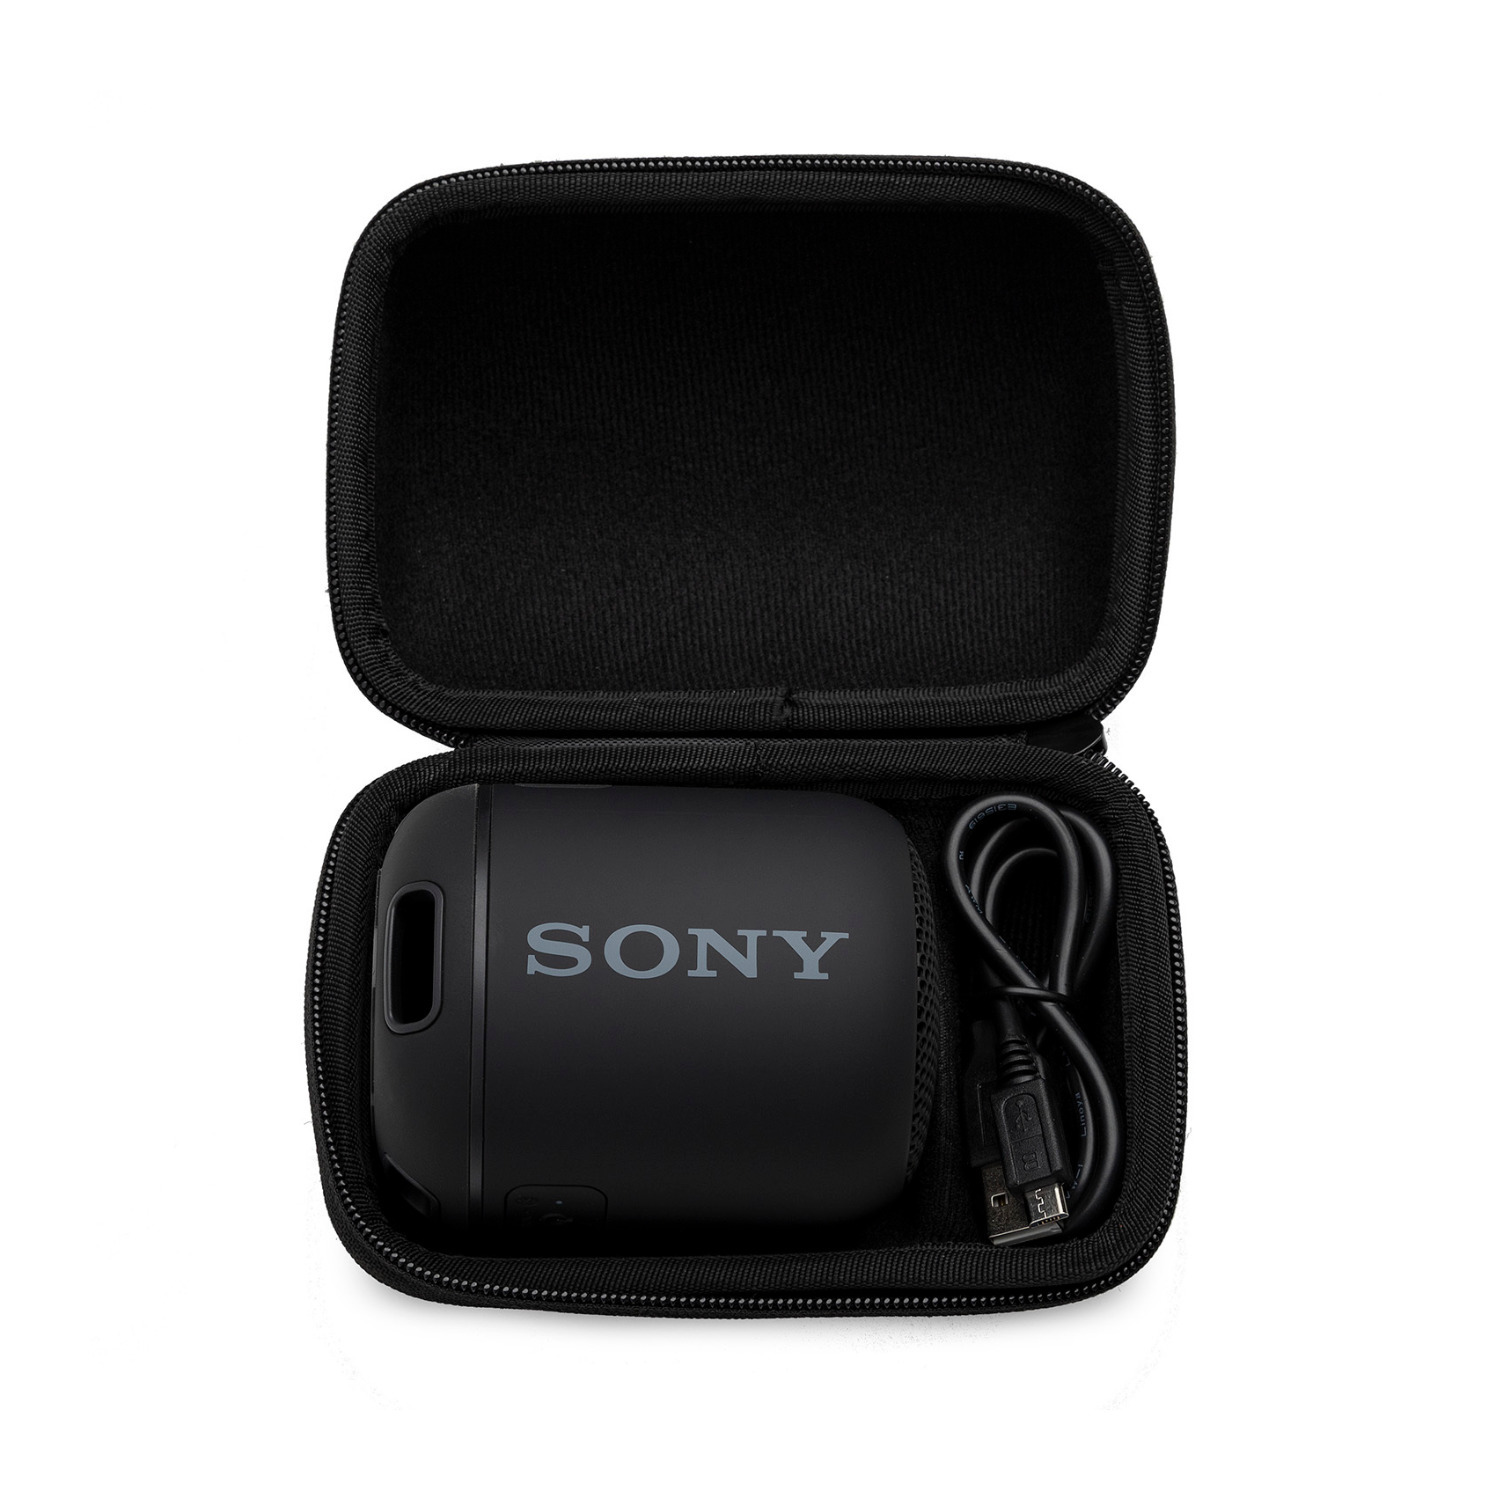 Knox Gear Hard Shell Case Compatible with Sony SRSXB10 & SRSXB12 Speakers - image 3 of 4